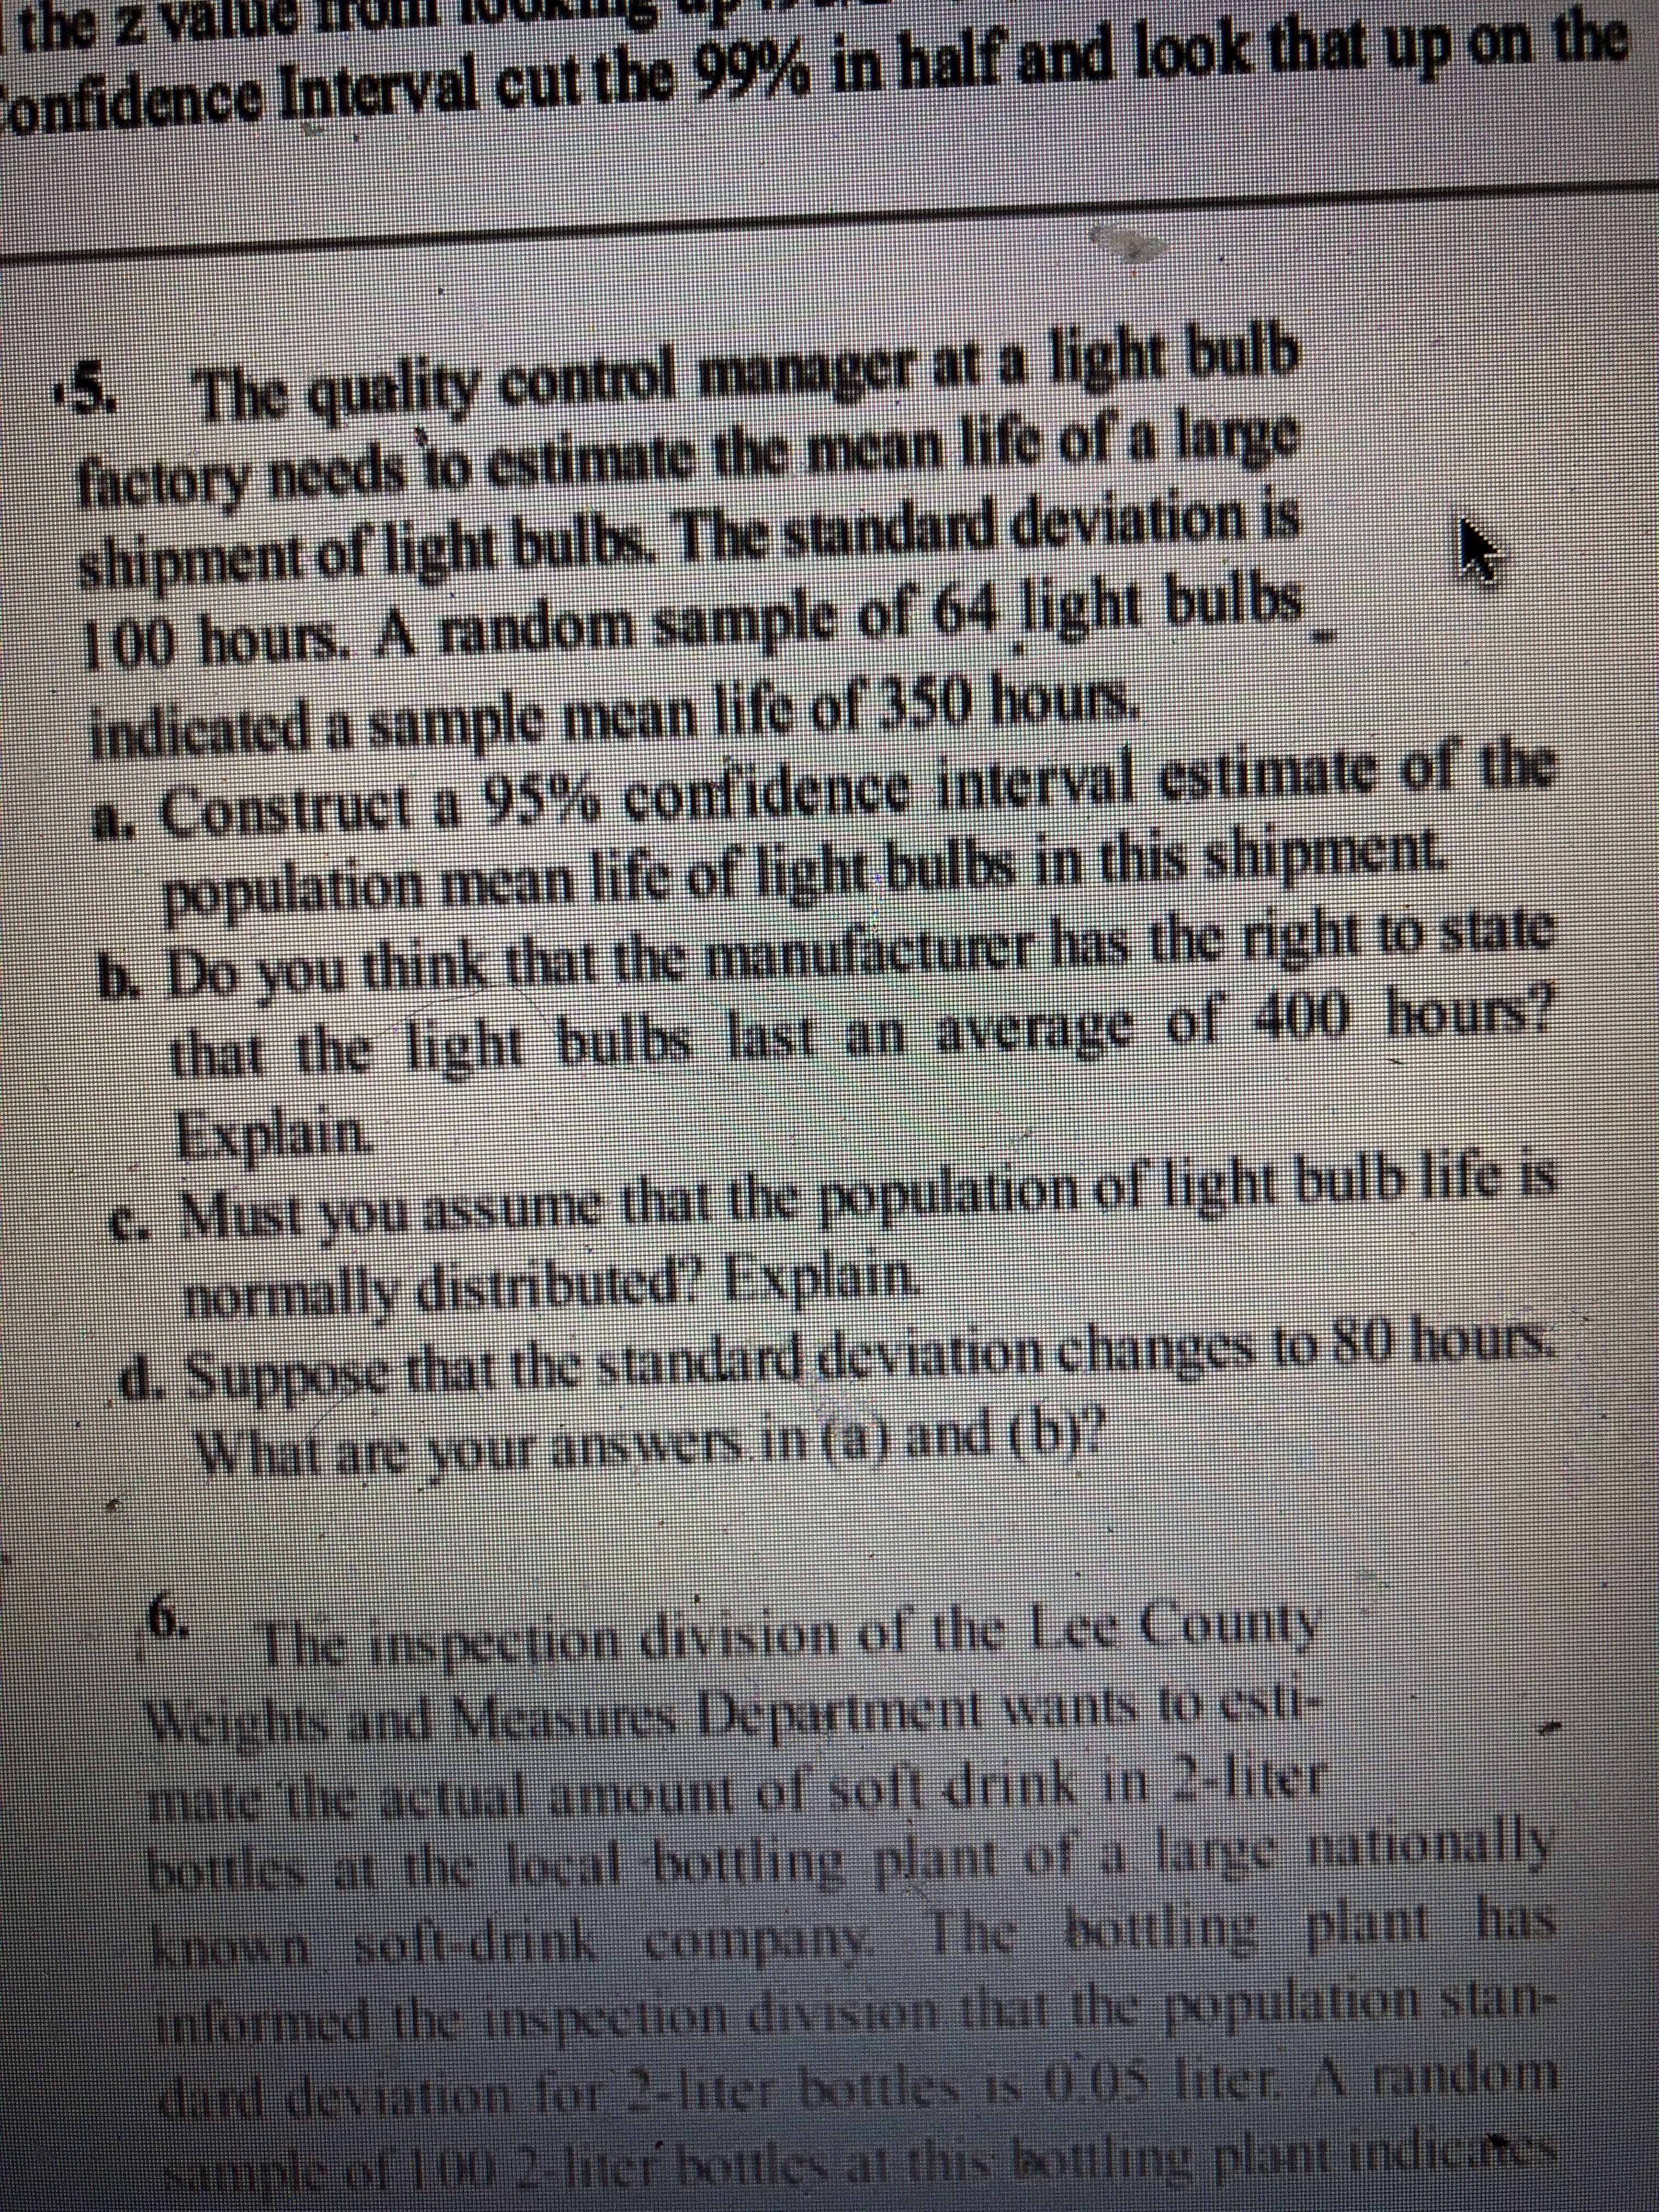 5. The quality control manager at a light bulb
factory needs to estimate the mean life of a large
shipment of light bulbs. The standard deviation is
